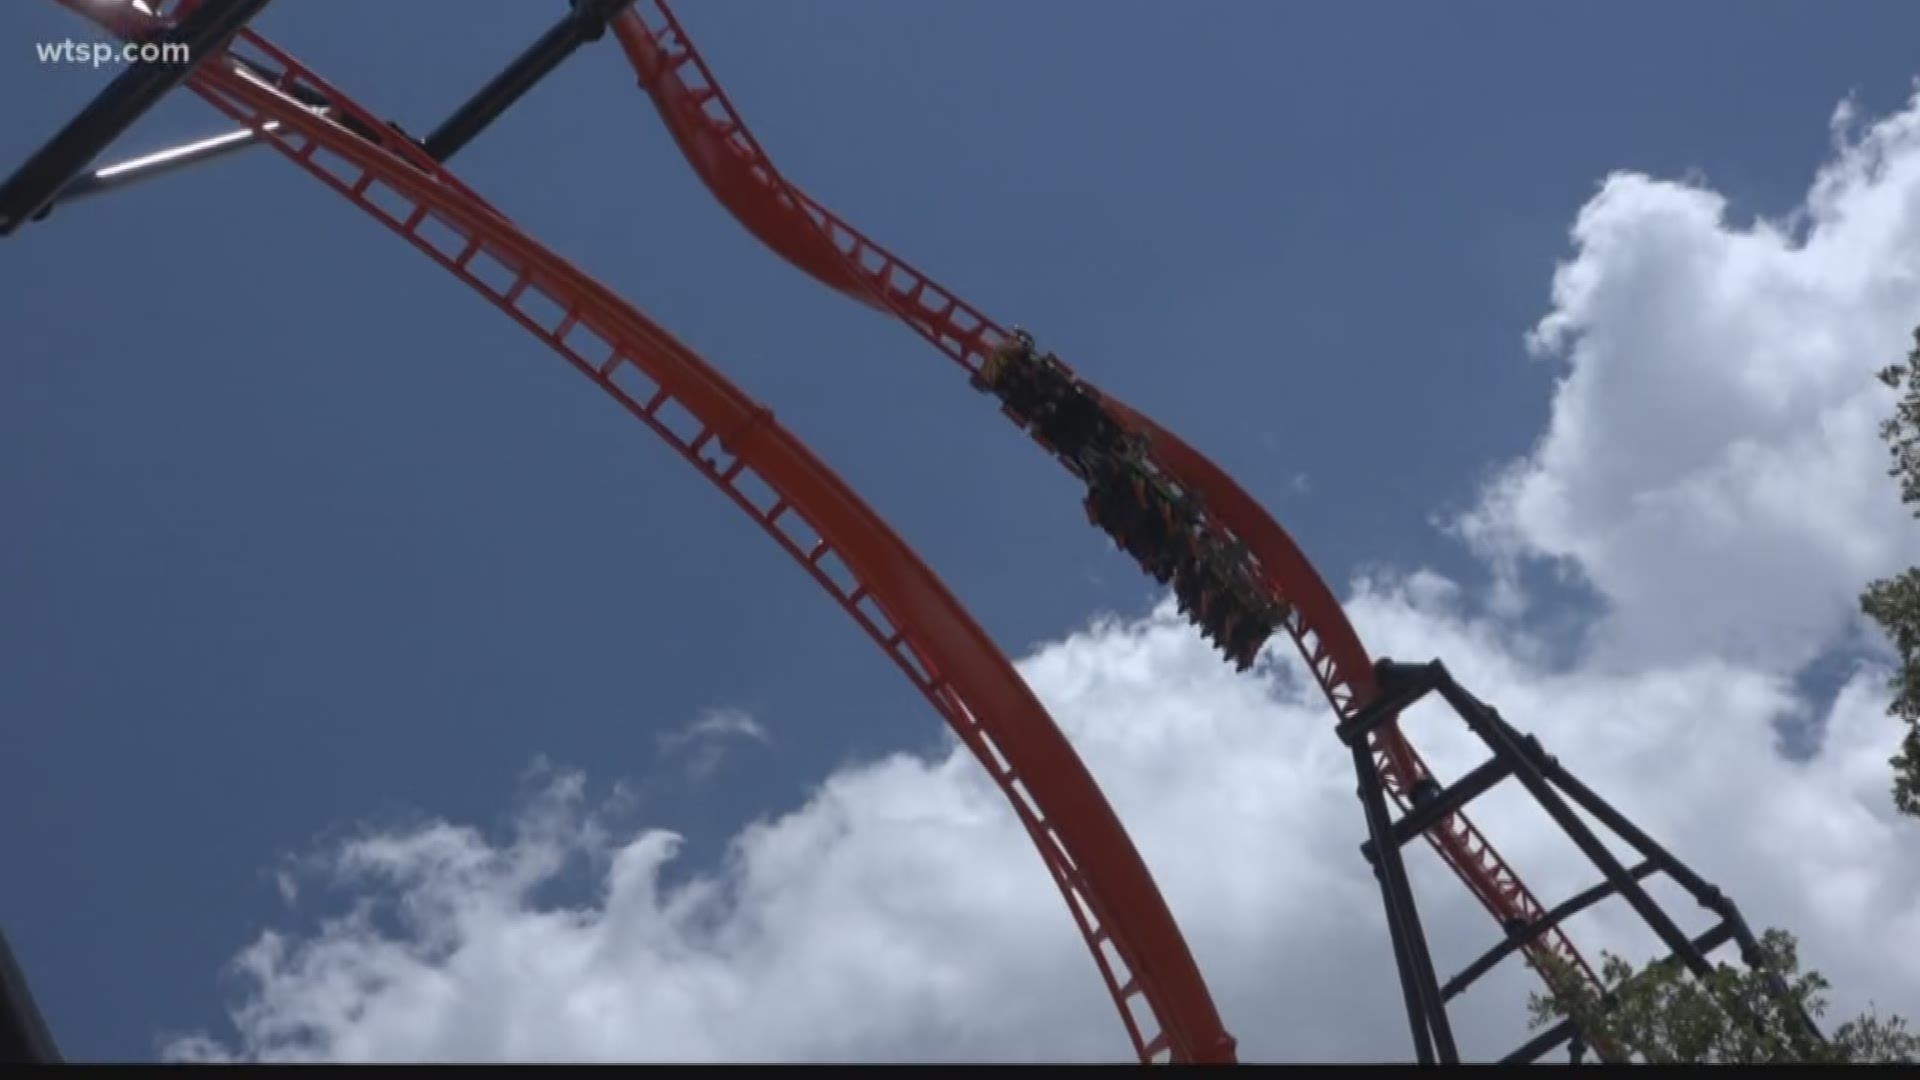 Tigris will catapult riders forward, then backward and then through heartline rolls and sky-high loops. https://on.wtsp.com/2Gz2qlX